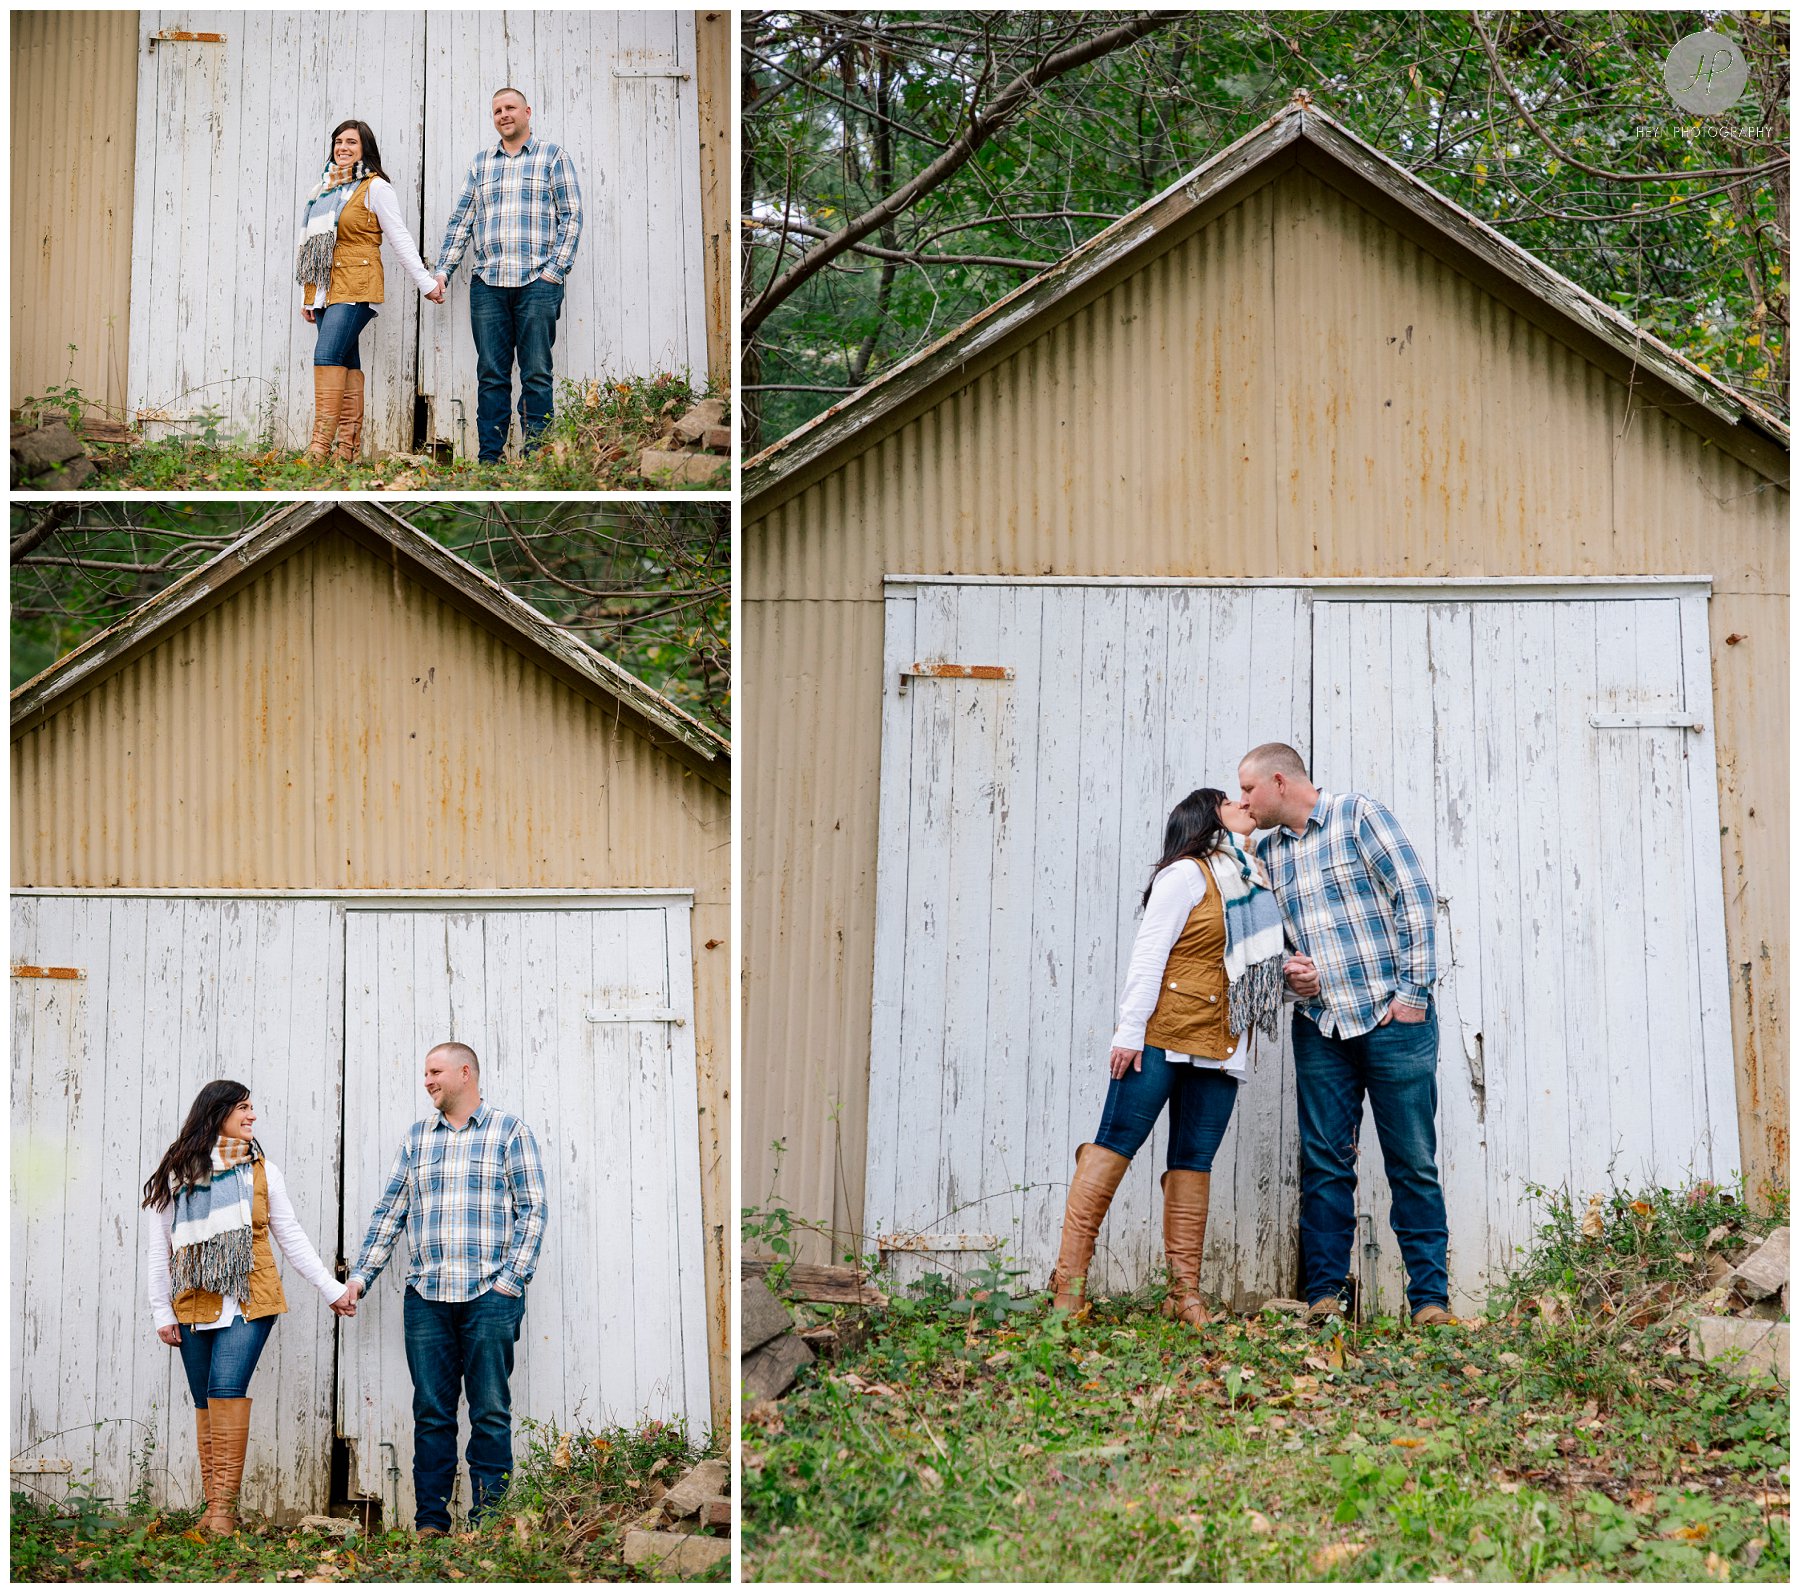  couple by barn at bayonet farm engagement session in new jersey